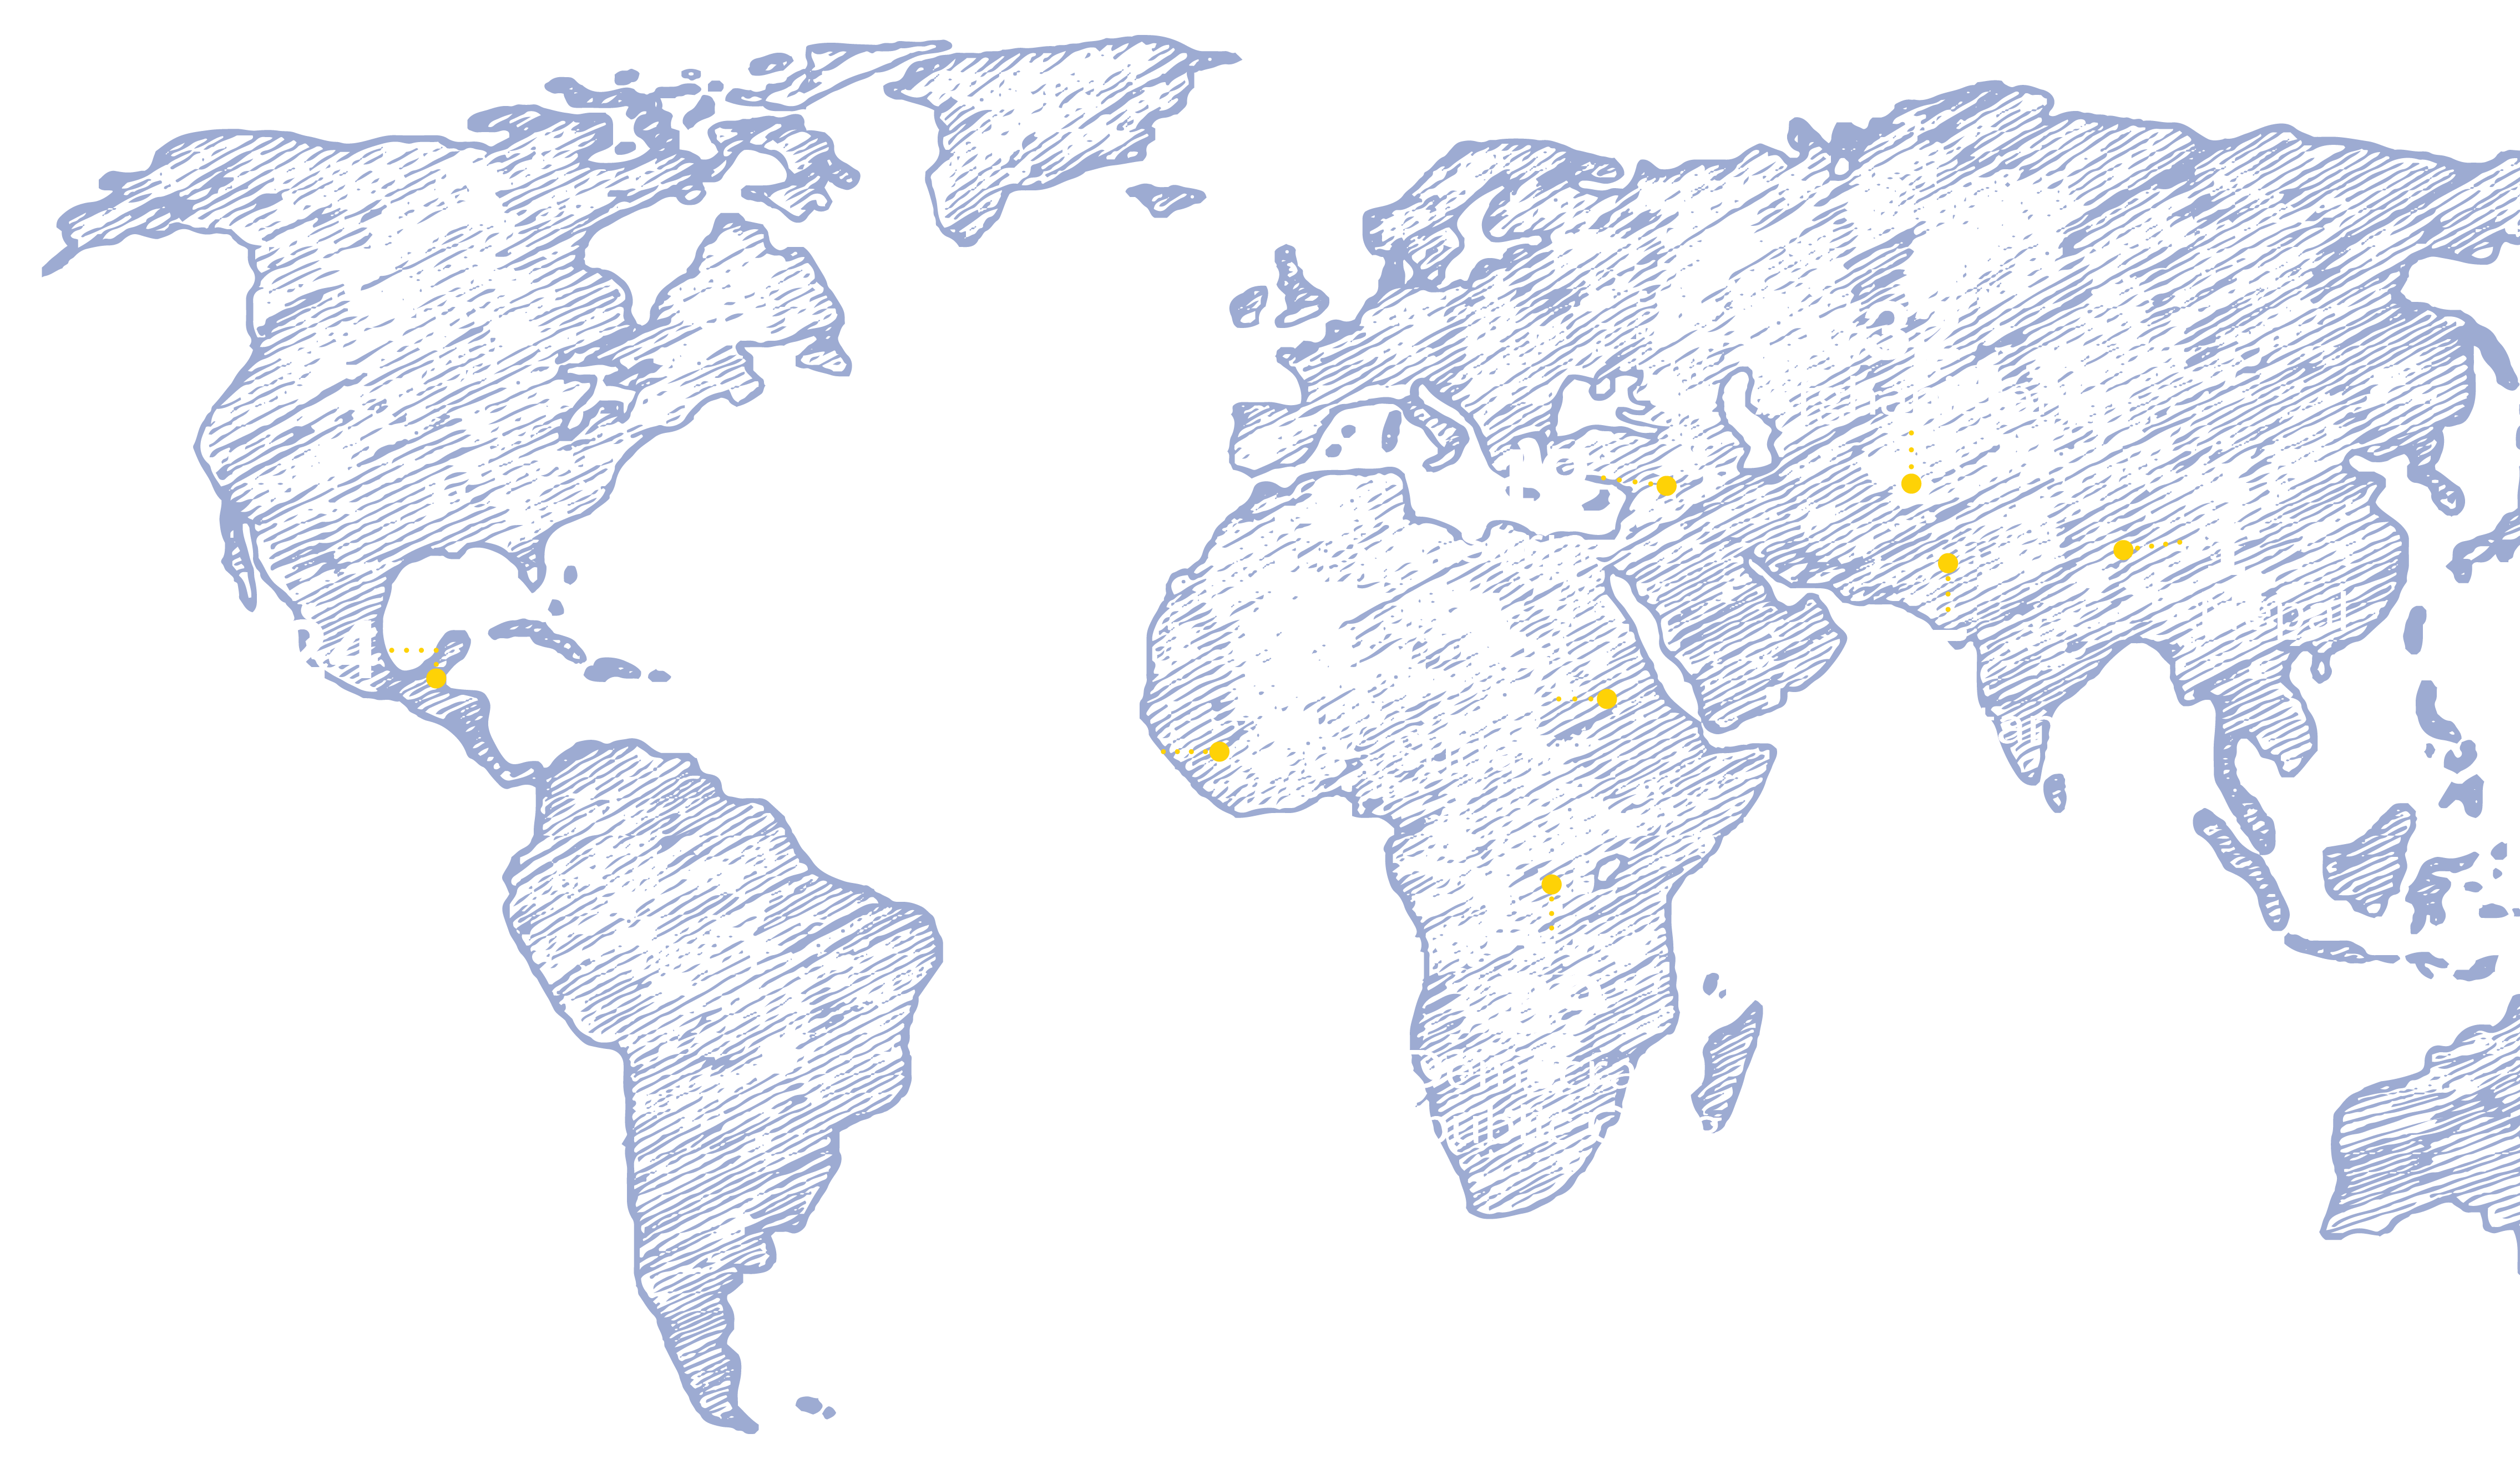 World Map with resettlement numbers. Guatemala 24, Guinea 3, Syria 19, Sudan 7, Democratic Republic of Congo 39, Pakistan 5, Afghanistan 32, Nepal 1.